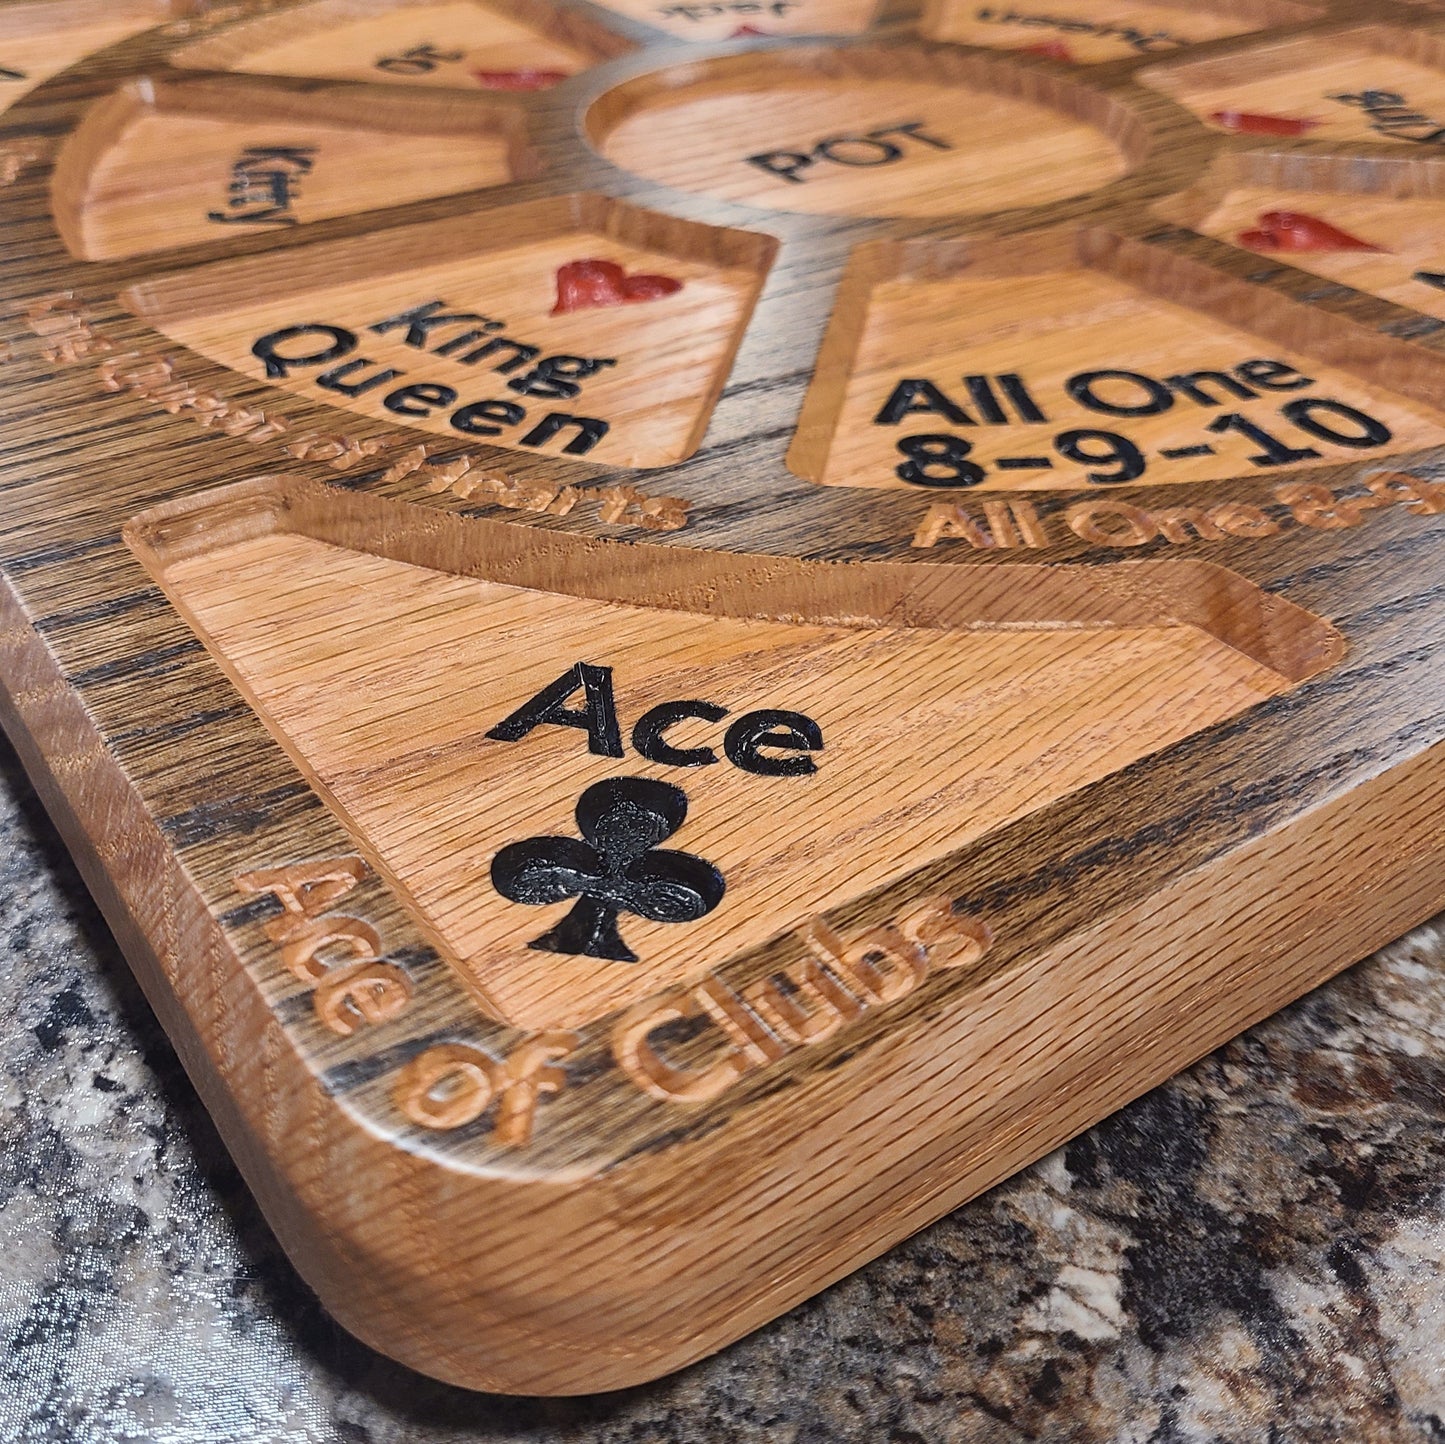 Limited Edition 16"x16" Solid Red Oak Tripoli, Michigan Rummy or Rummoli Board (8-9-10 without Turn Table)